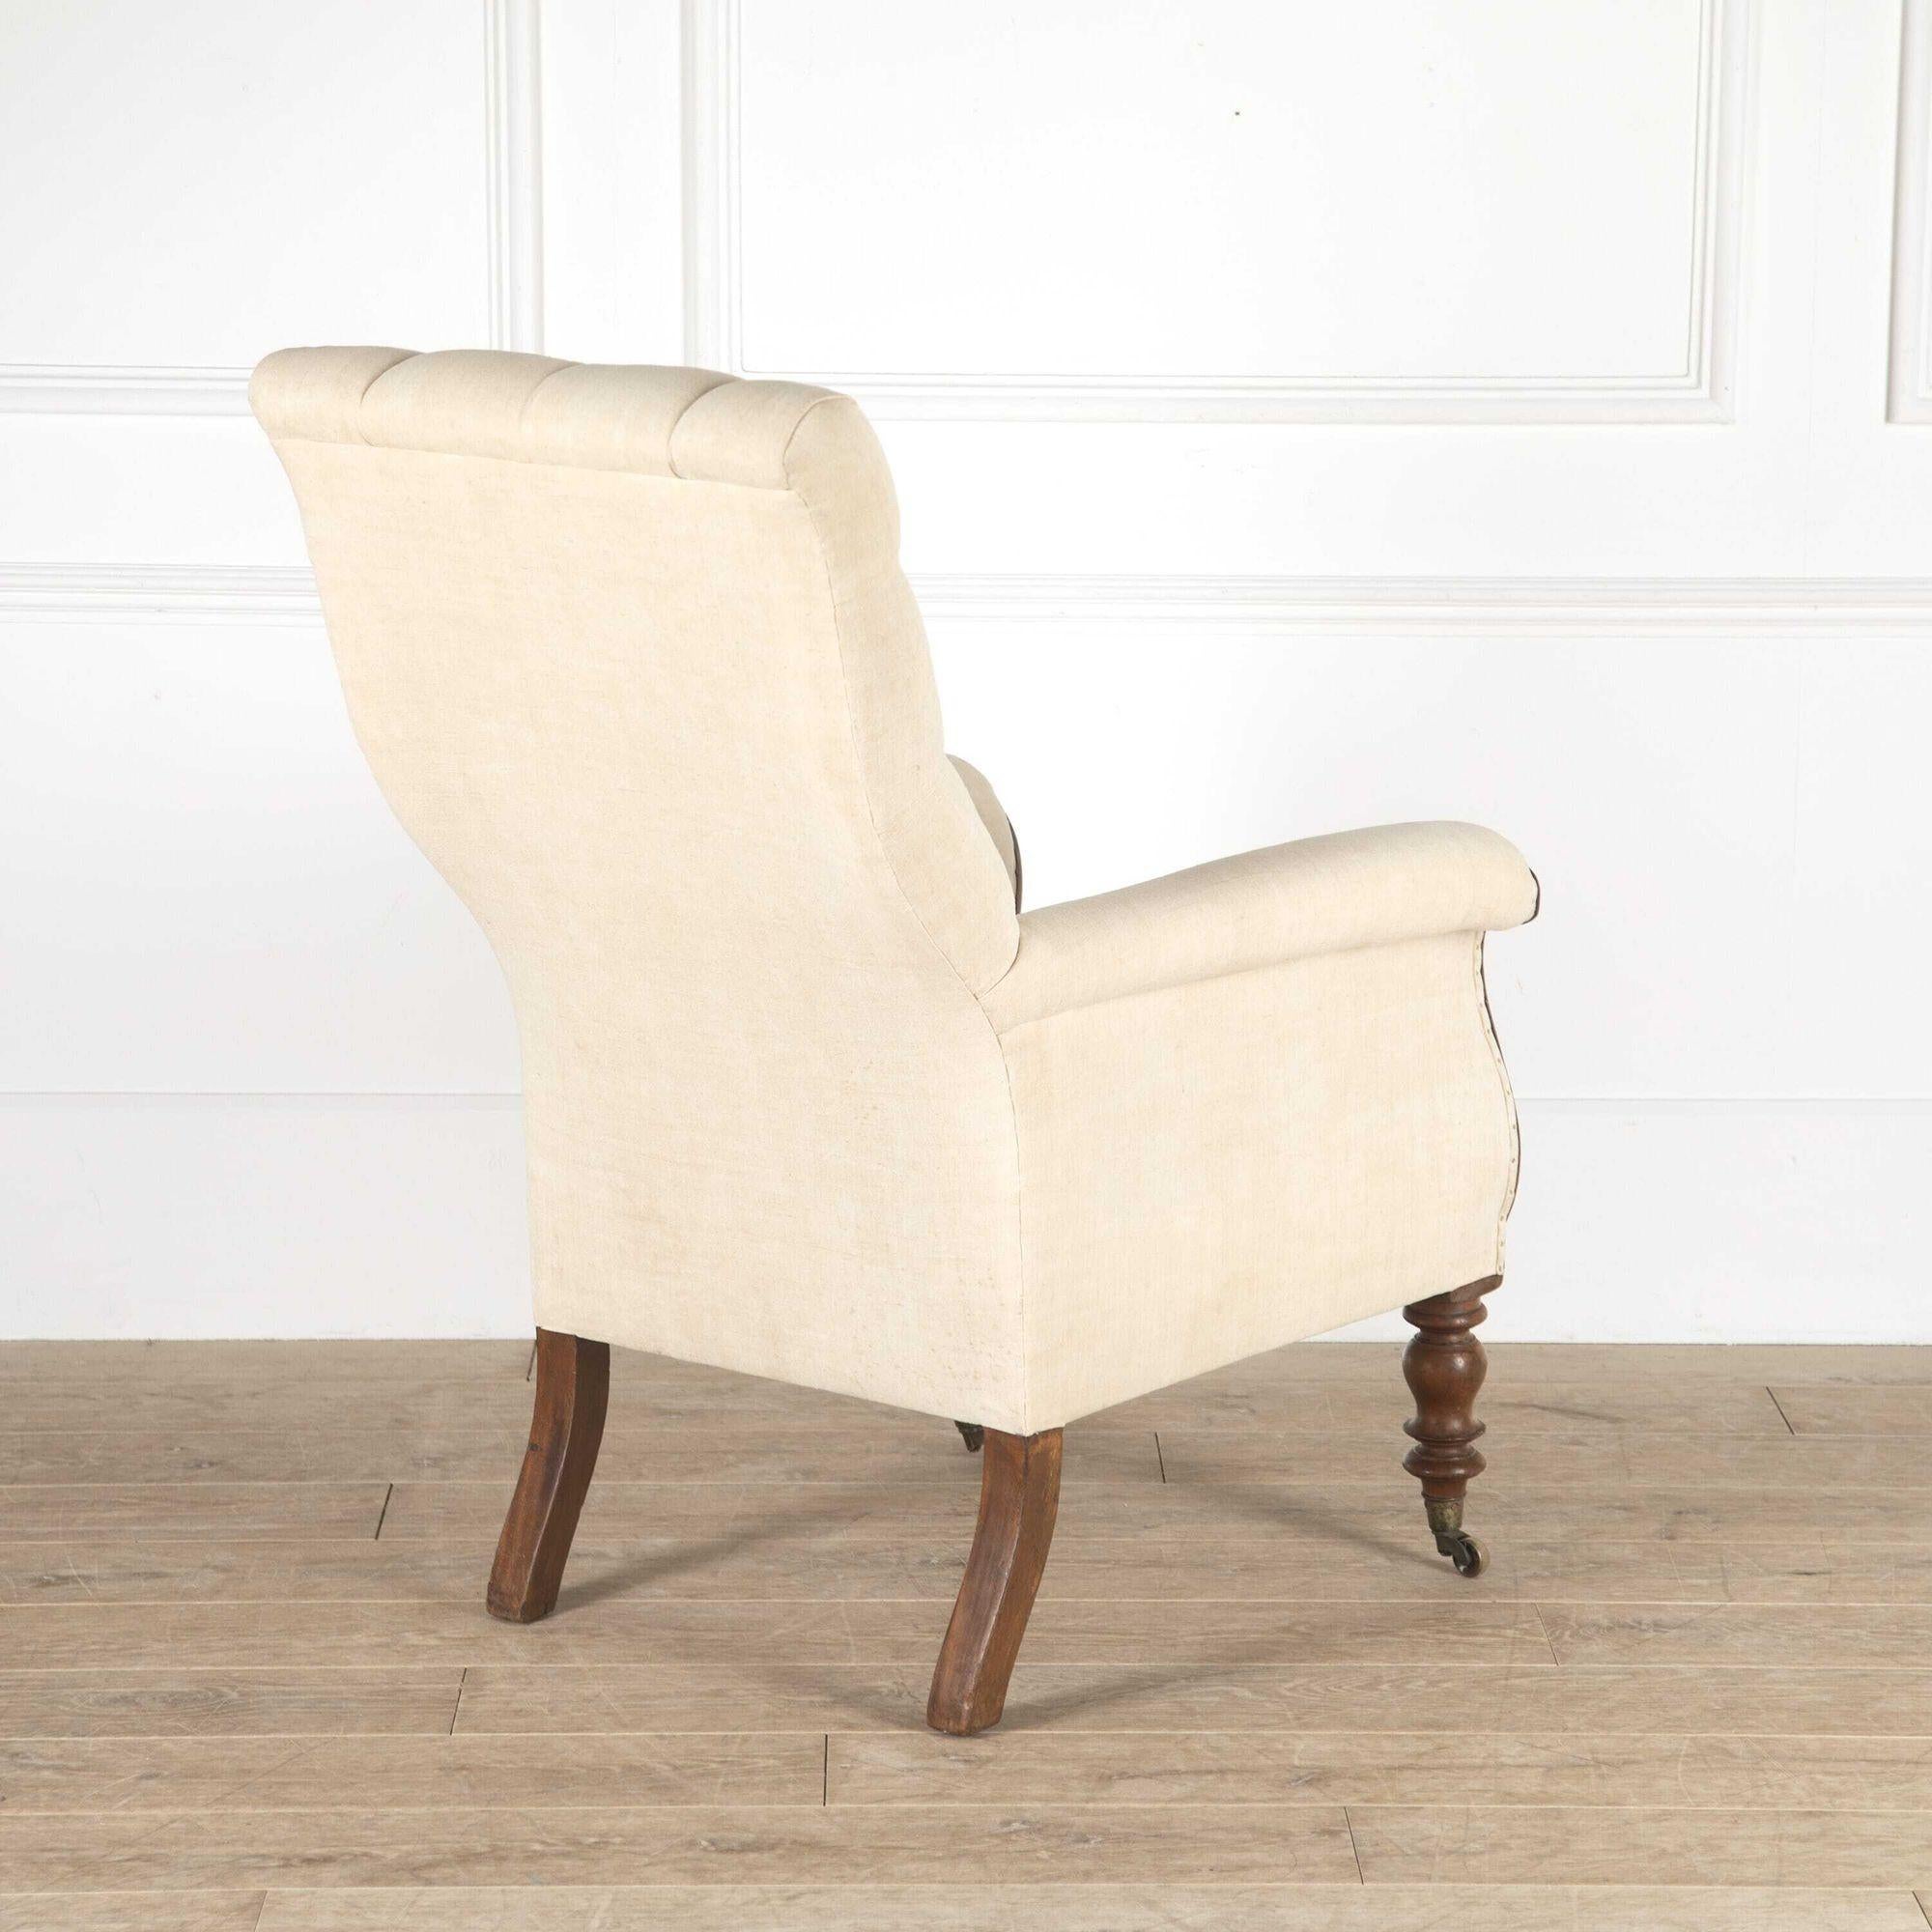 Early 19th century William IV mahogany library armchair.
This classic armchair features a deep-buttoned rectangular back, which has been re-upholstered in antique linen.
With lovely scroll armrests and boldly turned front legs with original